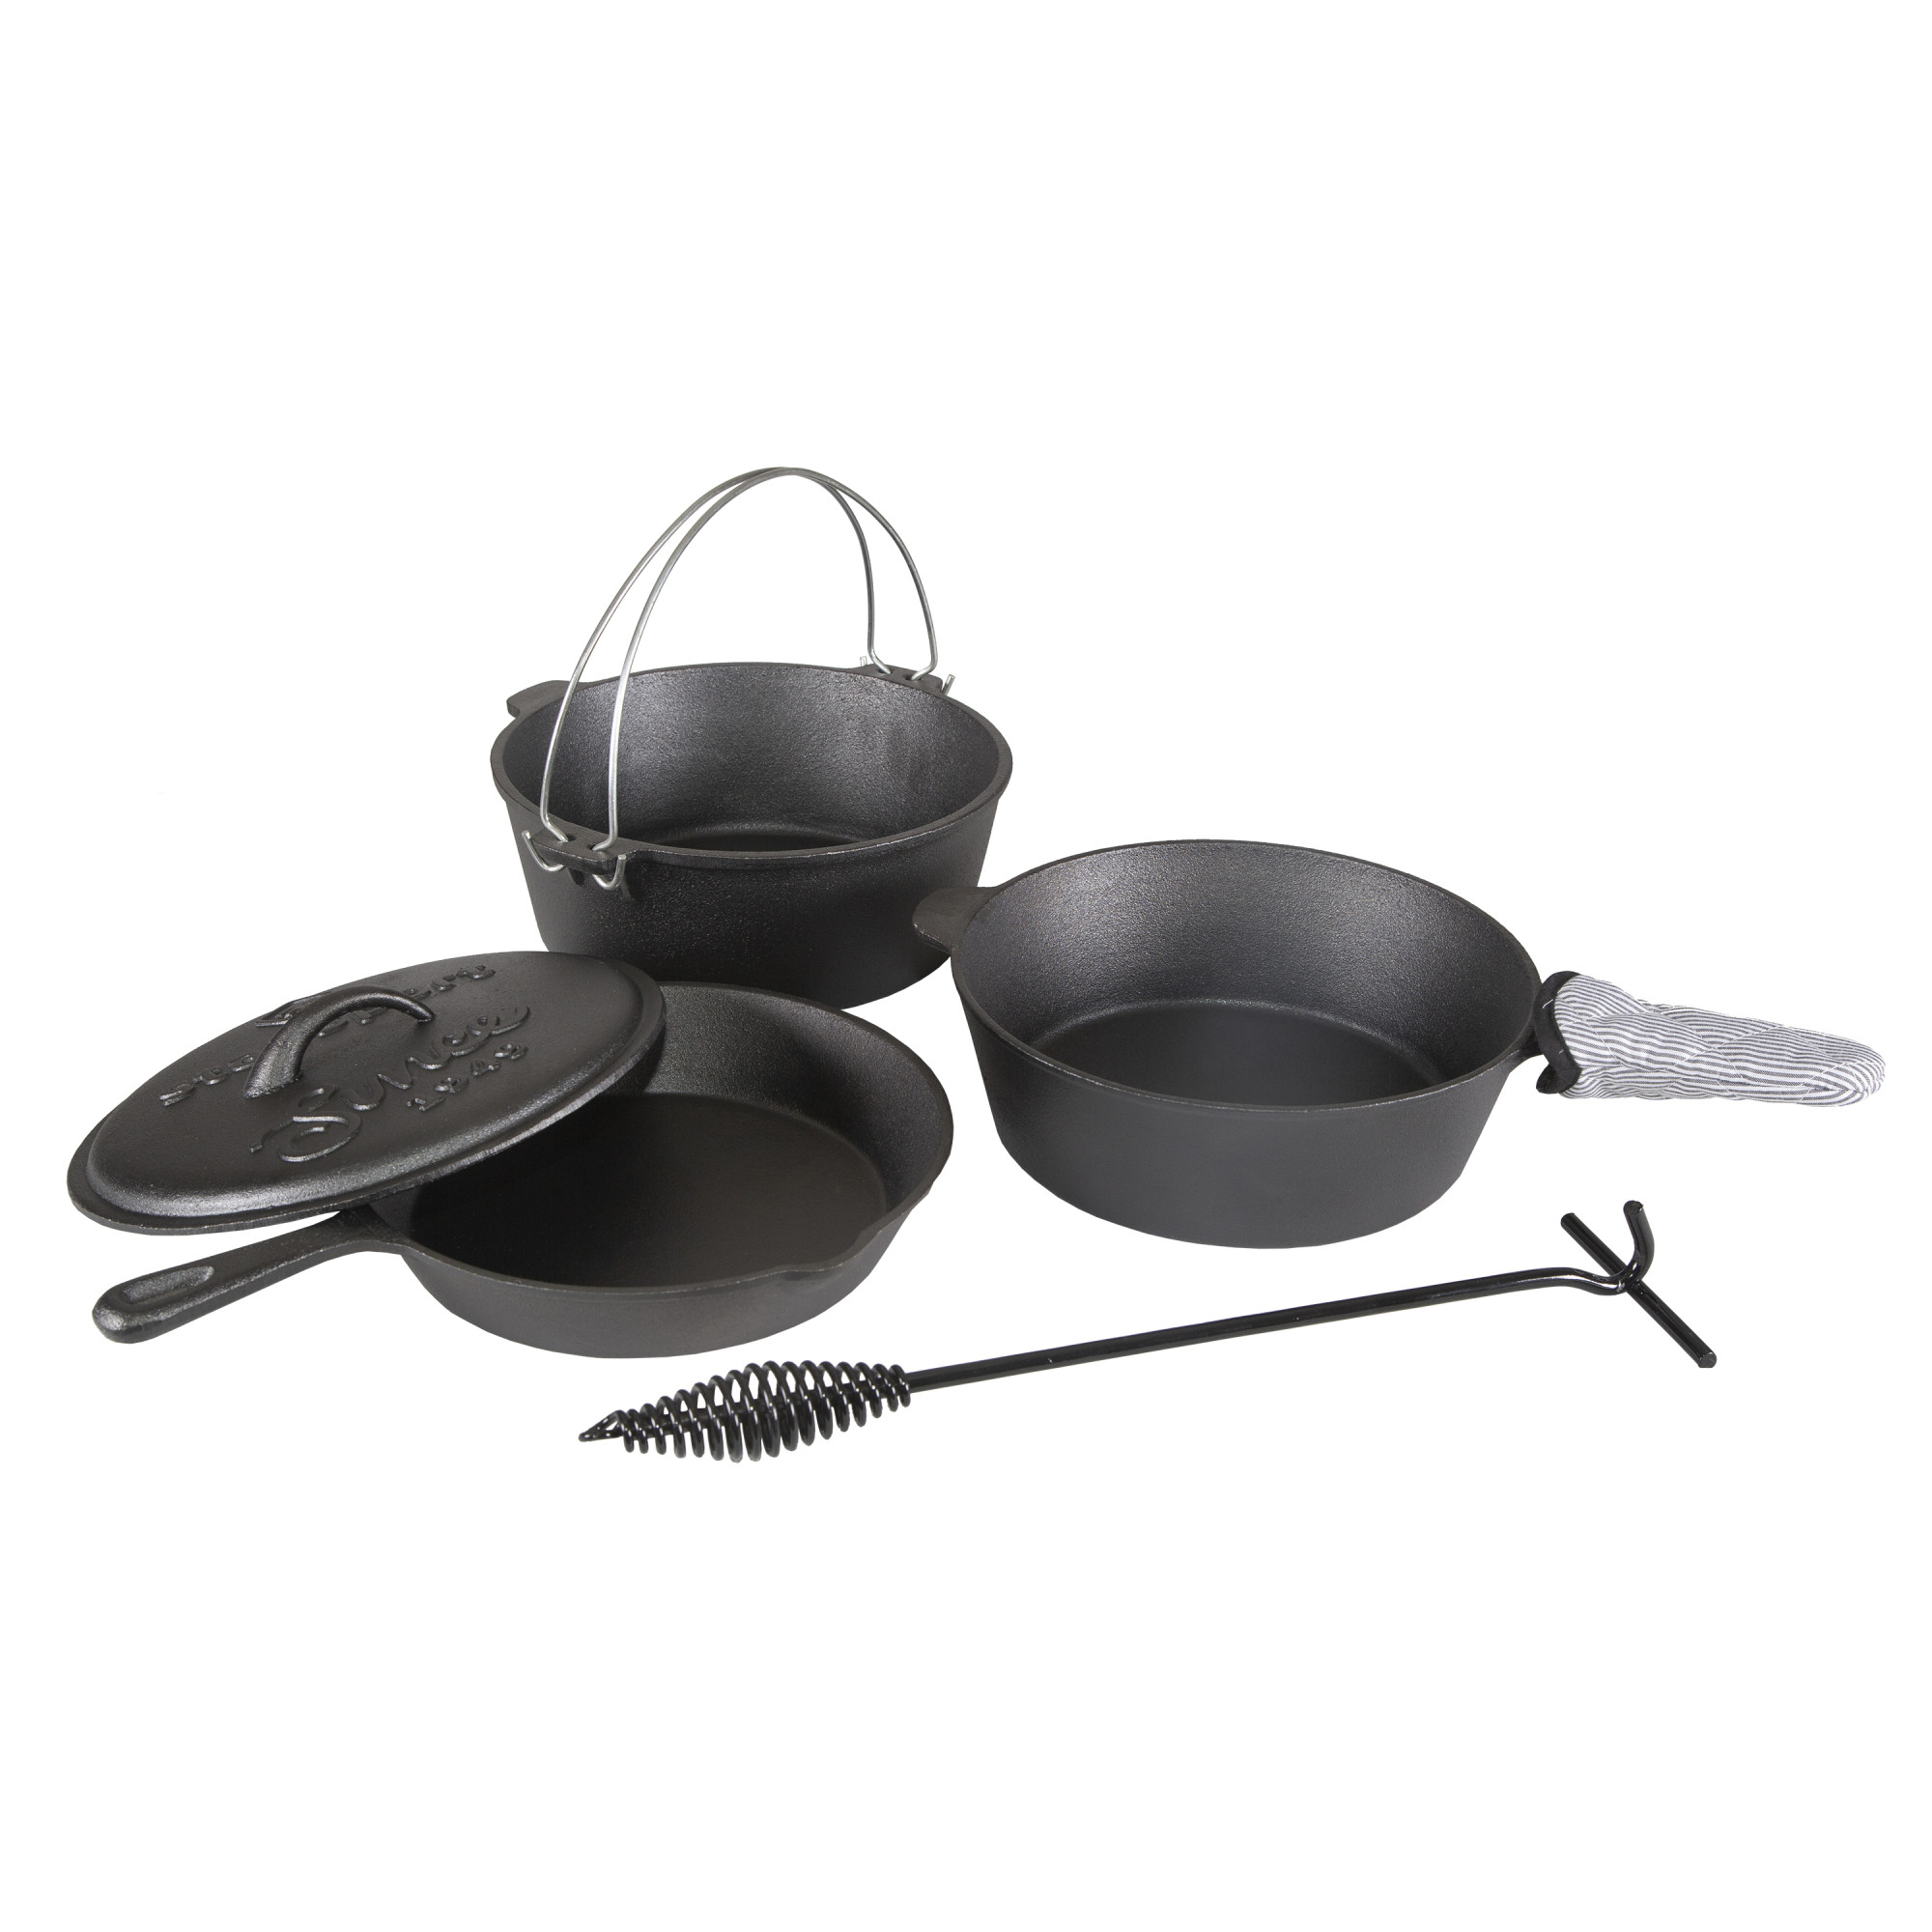 Stansport 6 Pieces Cast Iron Camping Mess Kits - image 1 of 29